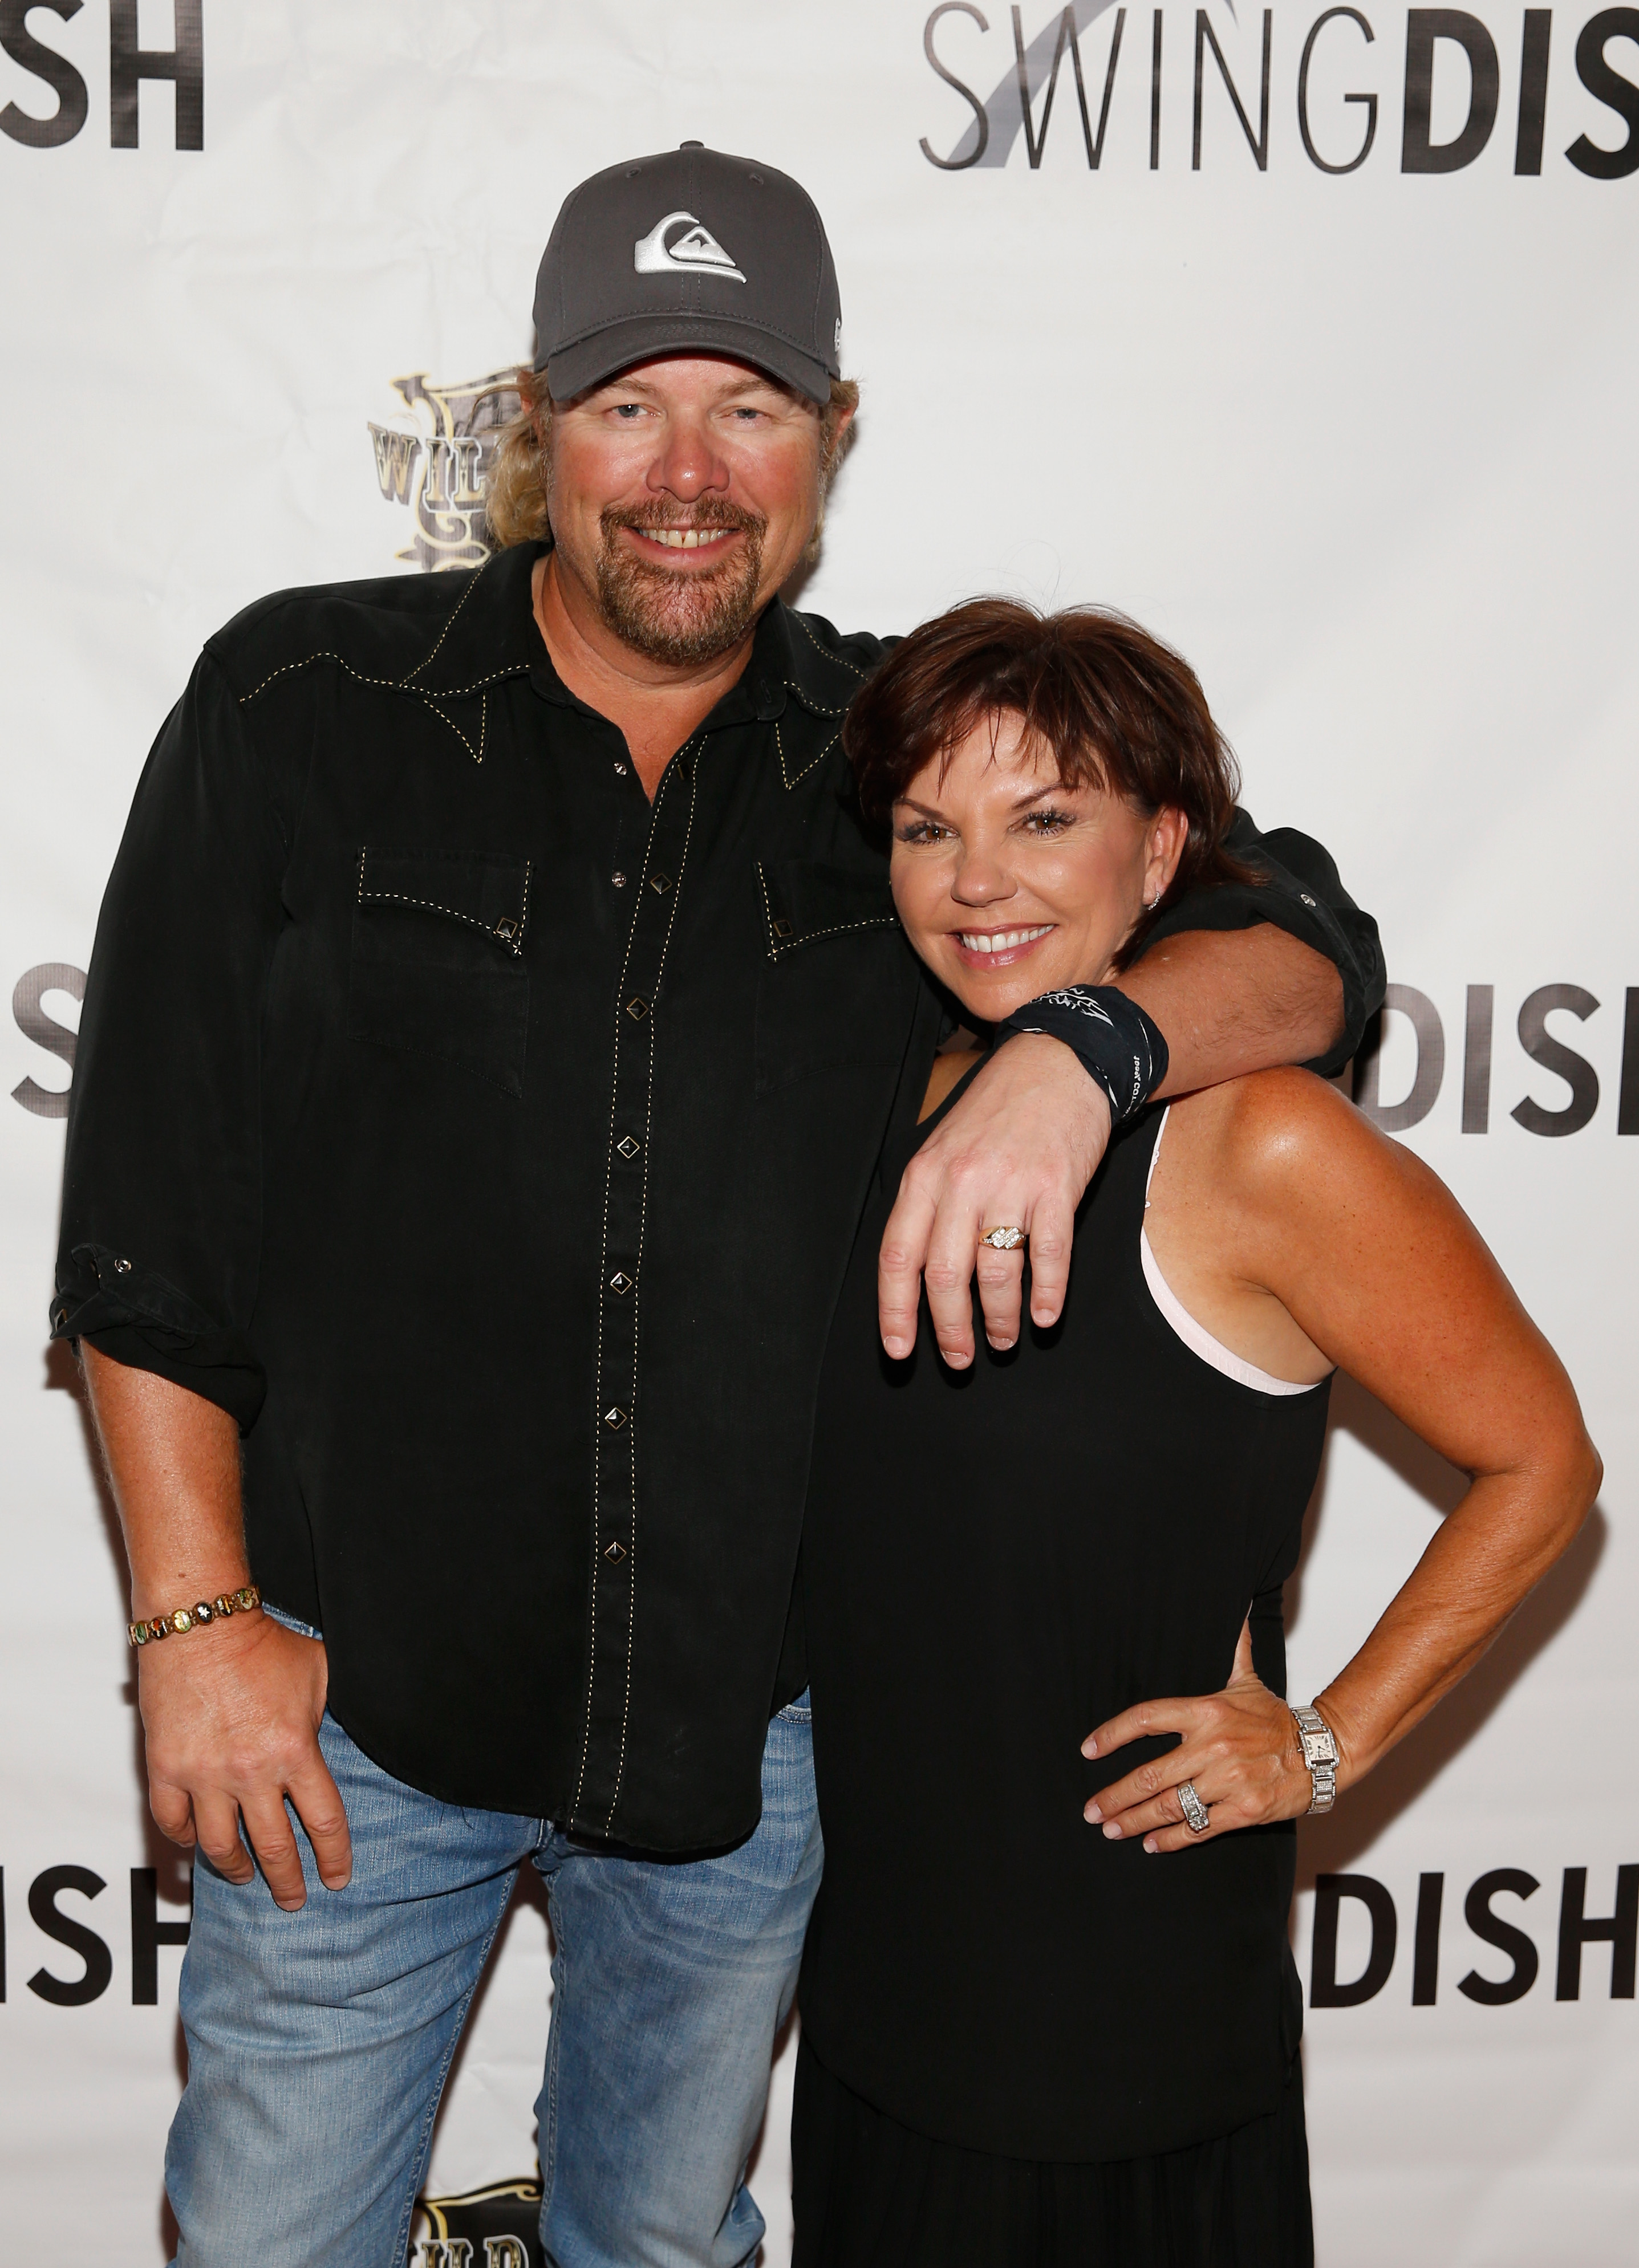 Toby Keith and Tricia Lucus attend the SwingDish Launch Event at The Country Club in Las Vegas, Nevada on August 18, 2015. | Source: Getty Images